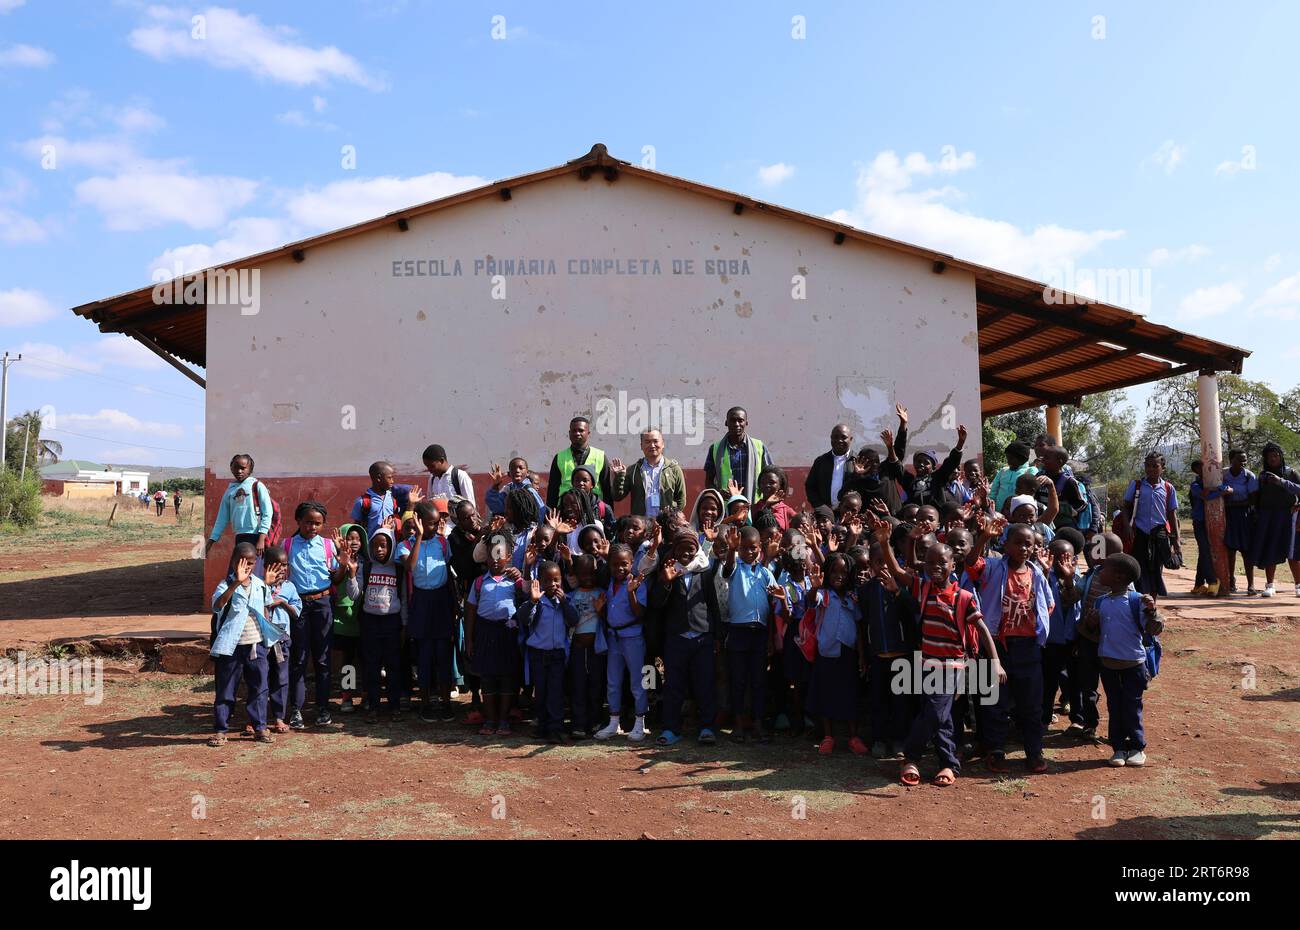 (230911) -- MAPUTO, Sept. 11, 2023 (Xinhua) -- Nunes Guardagea and his colleagues pose for a group photo with teachers and students at a school in Goba Village, Maputo Province, Mozambique, July 26, 2023. Government of Mozambique announced in May 2020 the completion of a project to bring digital satellite television signal to 1,000 villages in the country, which has benefited over 20,000 families.   The project, covering all the ten provinces and the capital city of Mozambique, was co-funded by China and implemented by the Chinese electronics and media company StarTimes. It trained work force Stock Photo